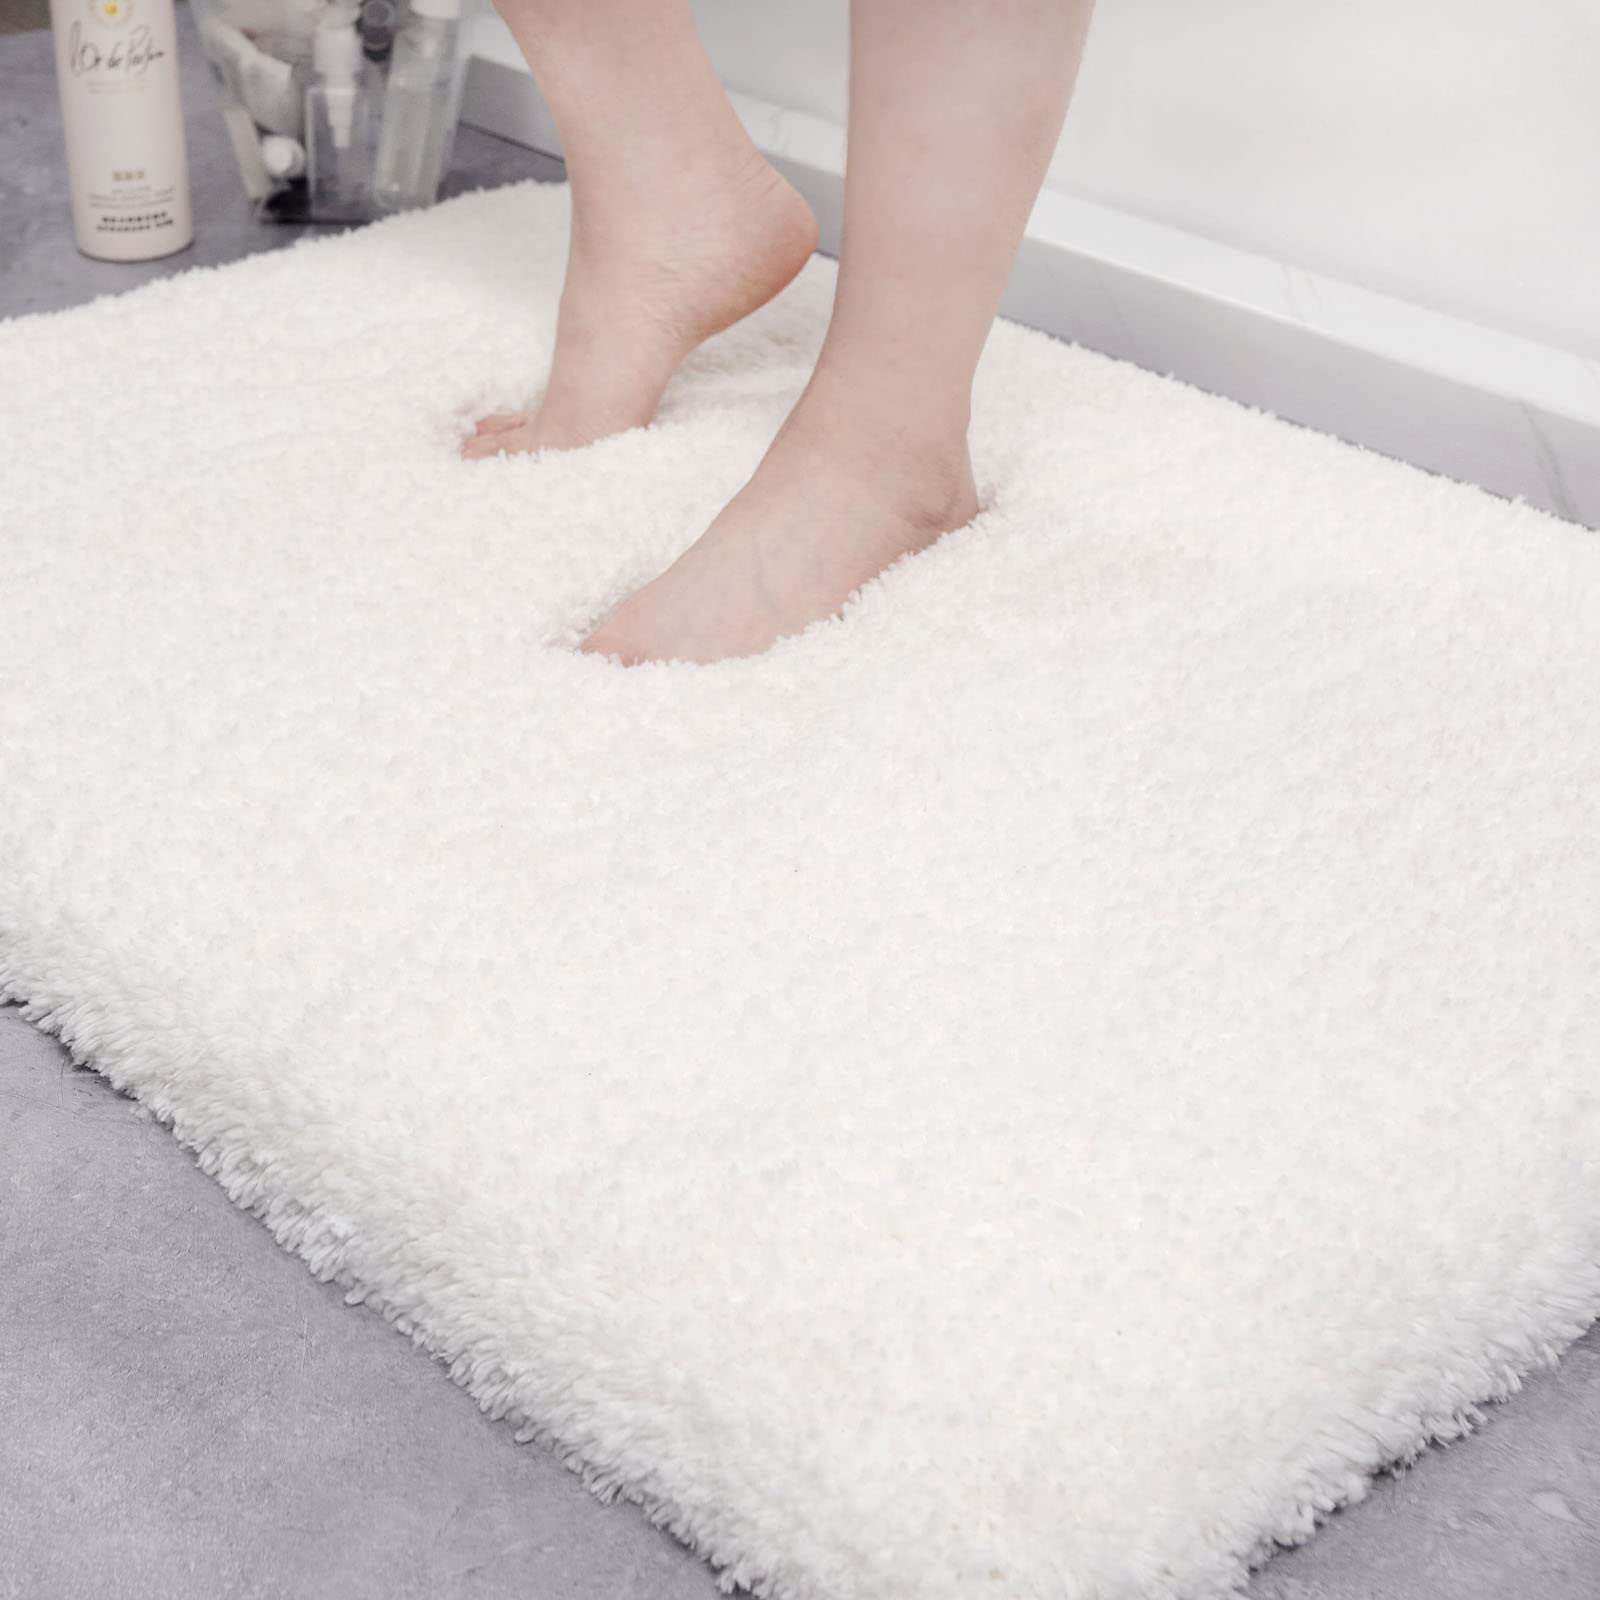 ILANGO Microfiber Bathroom Rug Super Absorbent, Washable Bath Mat Non Slip for Floor, Thick Plush Shaggy Bath Rug with Rubber Bottom for Bathtub Shower Sink, Extra Soft 16.9" * 23.6" (White) 16.9*23.6 inches White